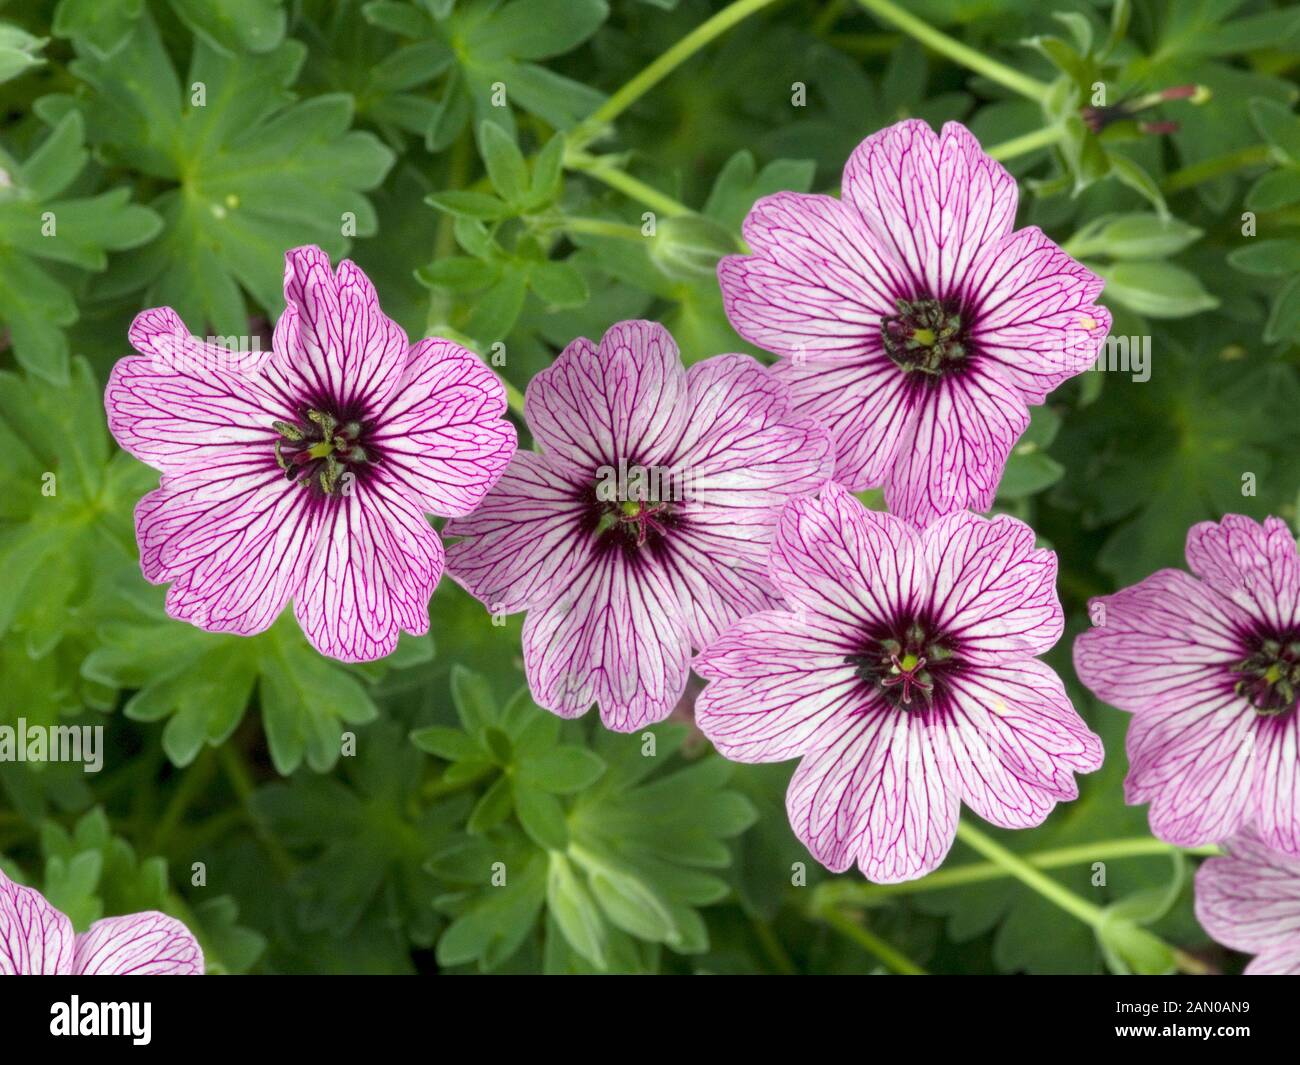 Striped Geranium Stock Photography and Images - Alamy